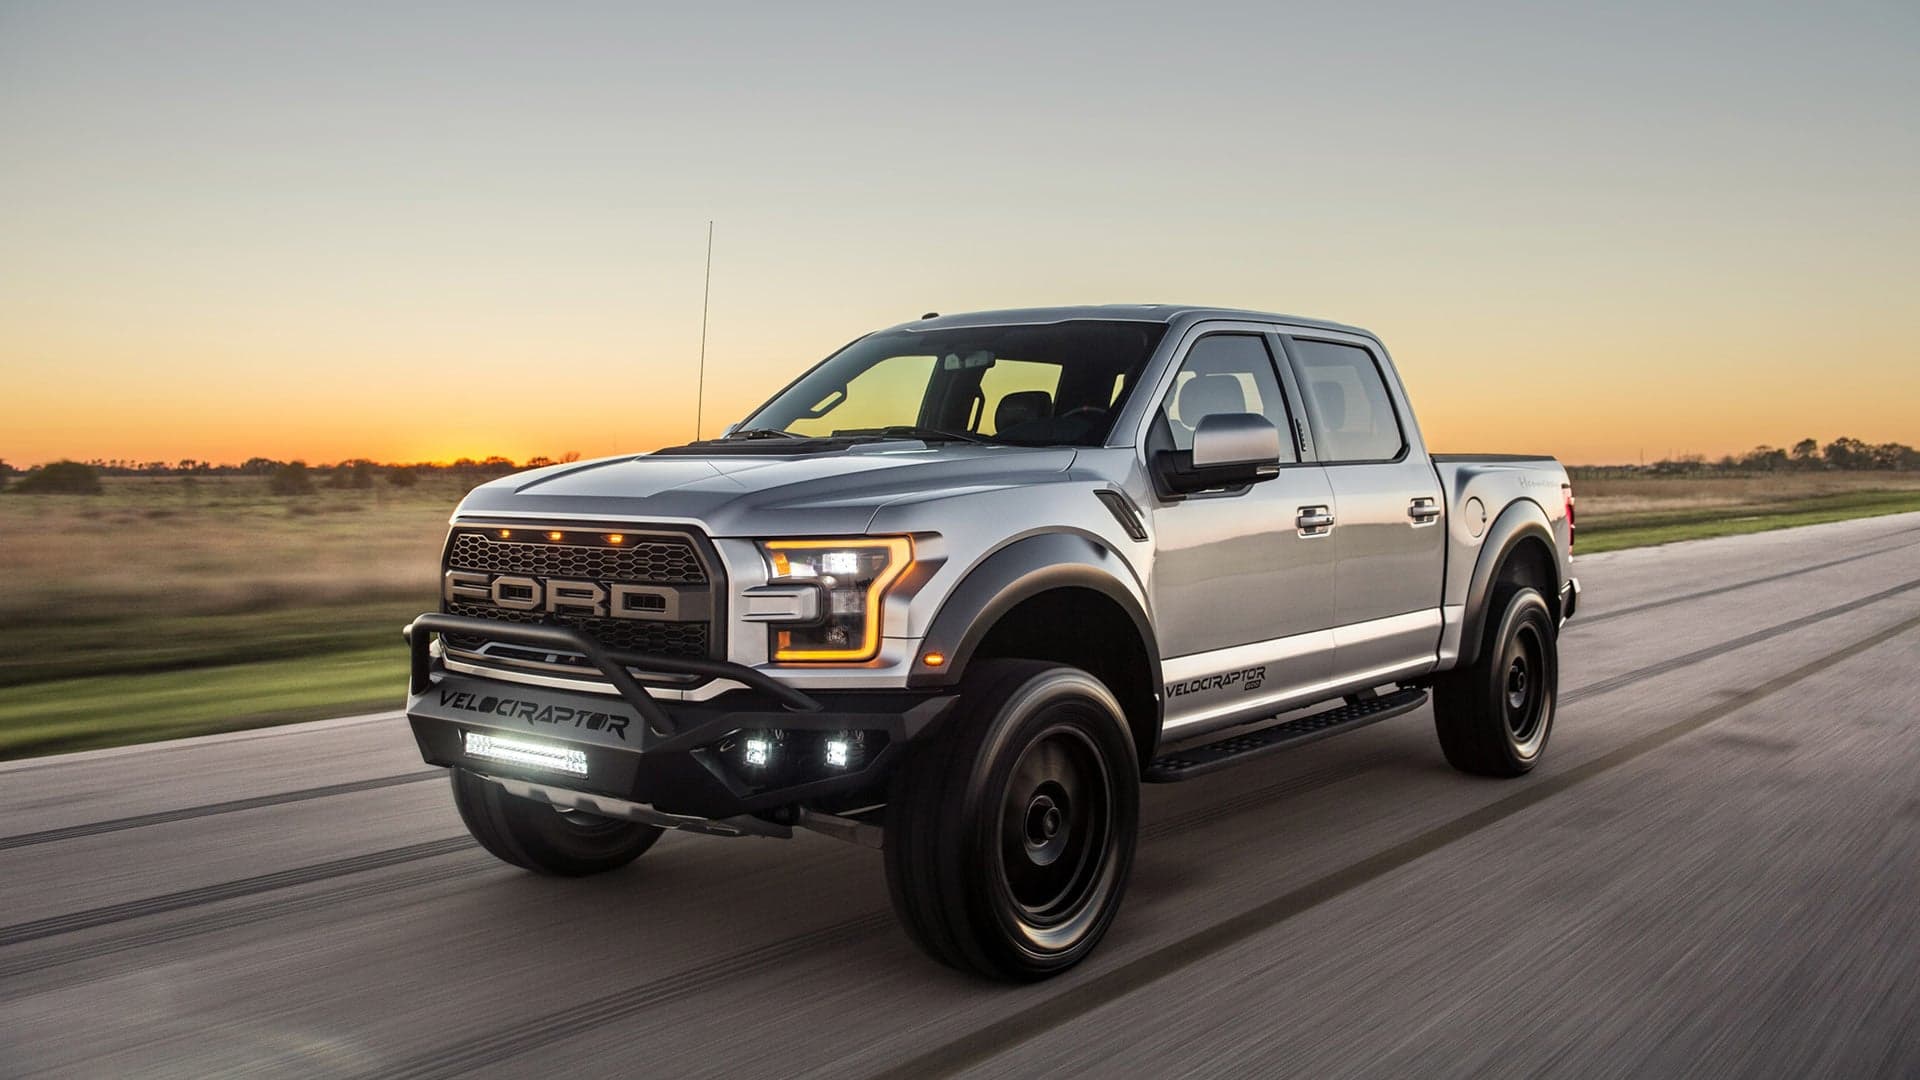 Hennessey Performance’s 605-Horsepower Ford F-150 VelociRaptor Is One Expensive Beast